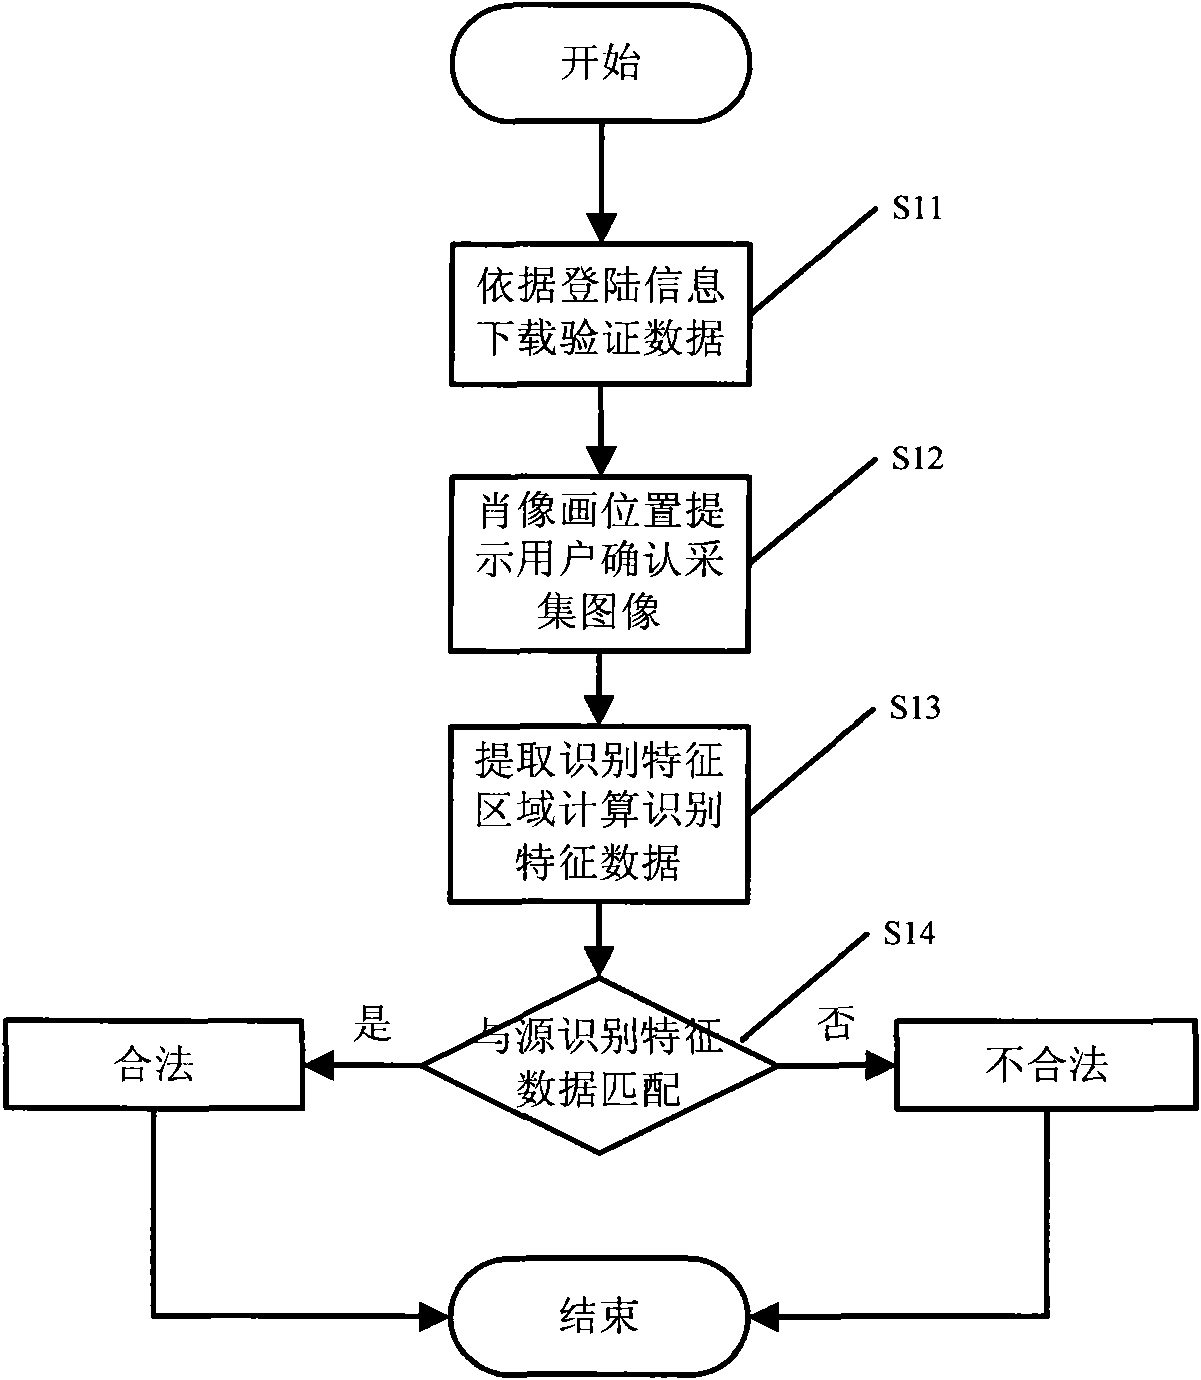 Face recognition based method for authenticating identity